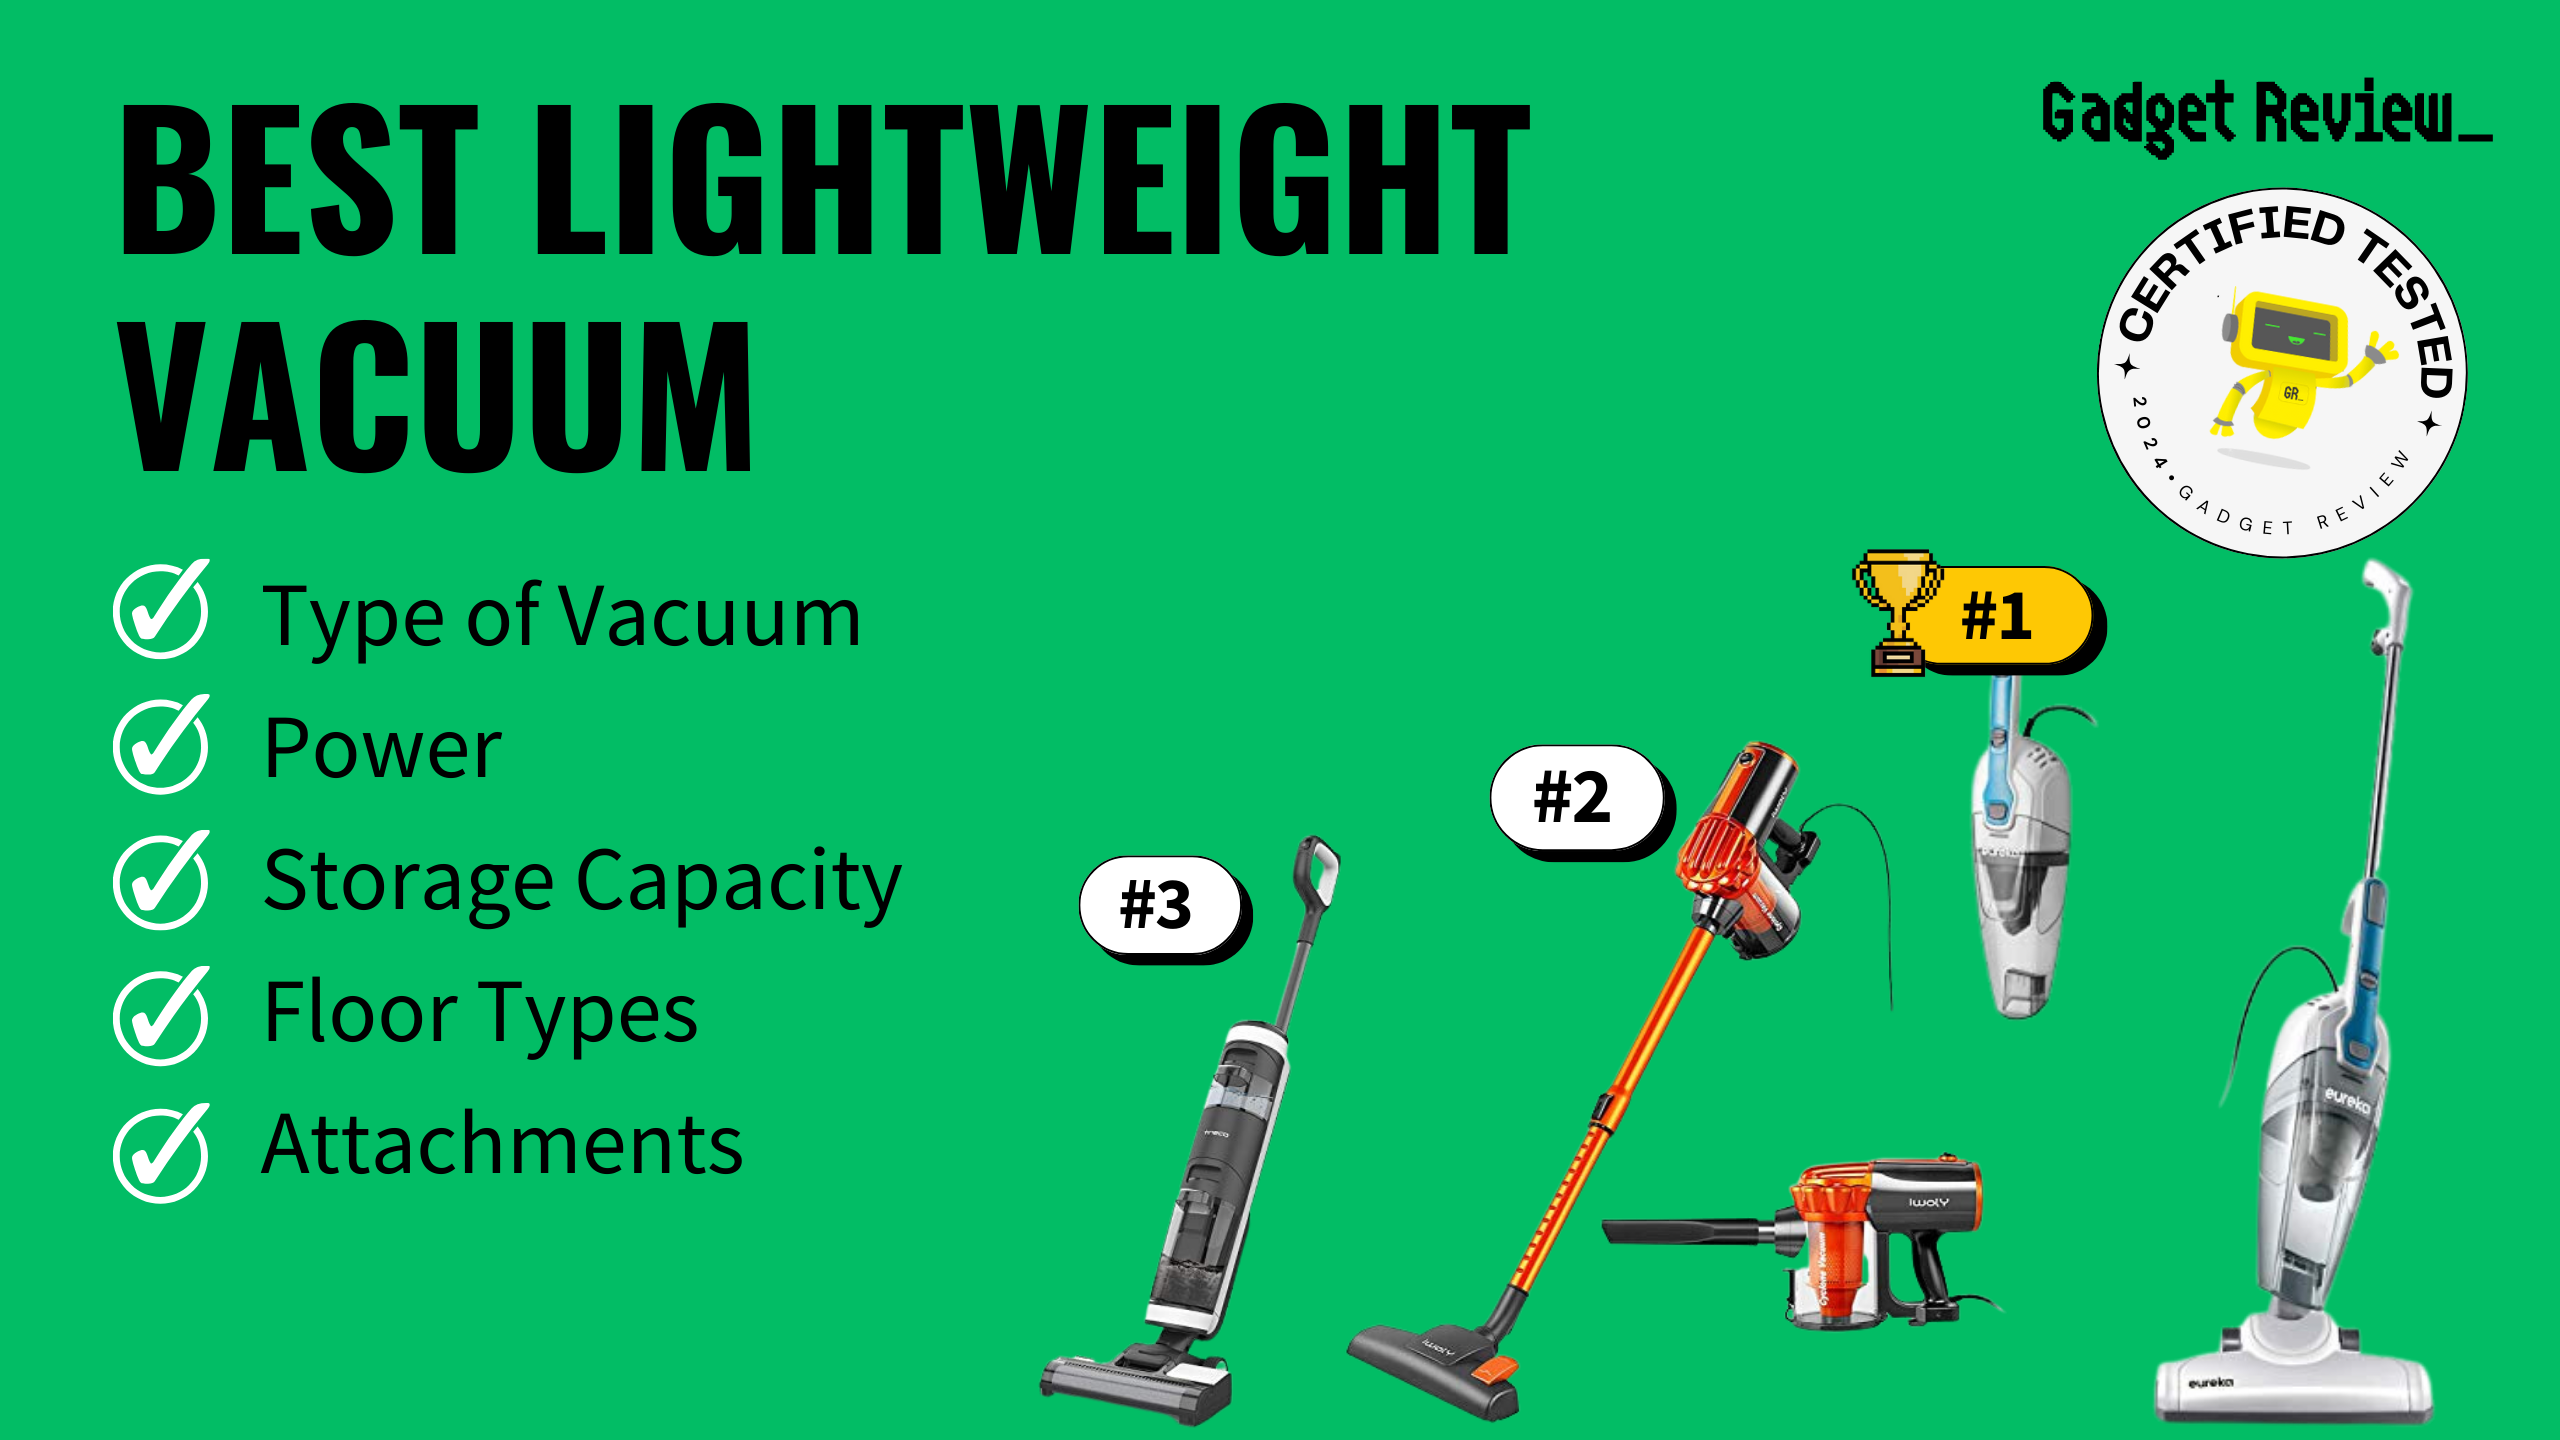 best lightweight vacuum guide that shows the top best vacuum cleaner model